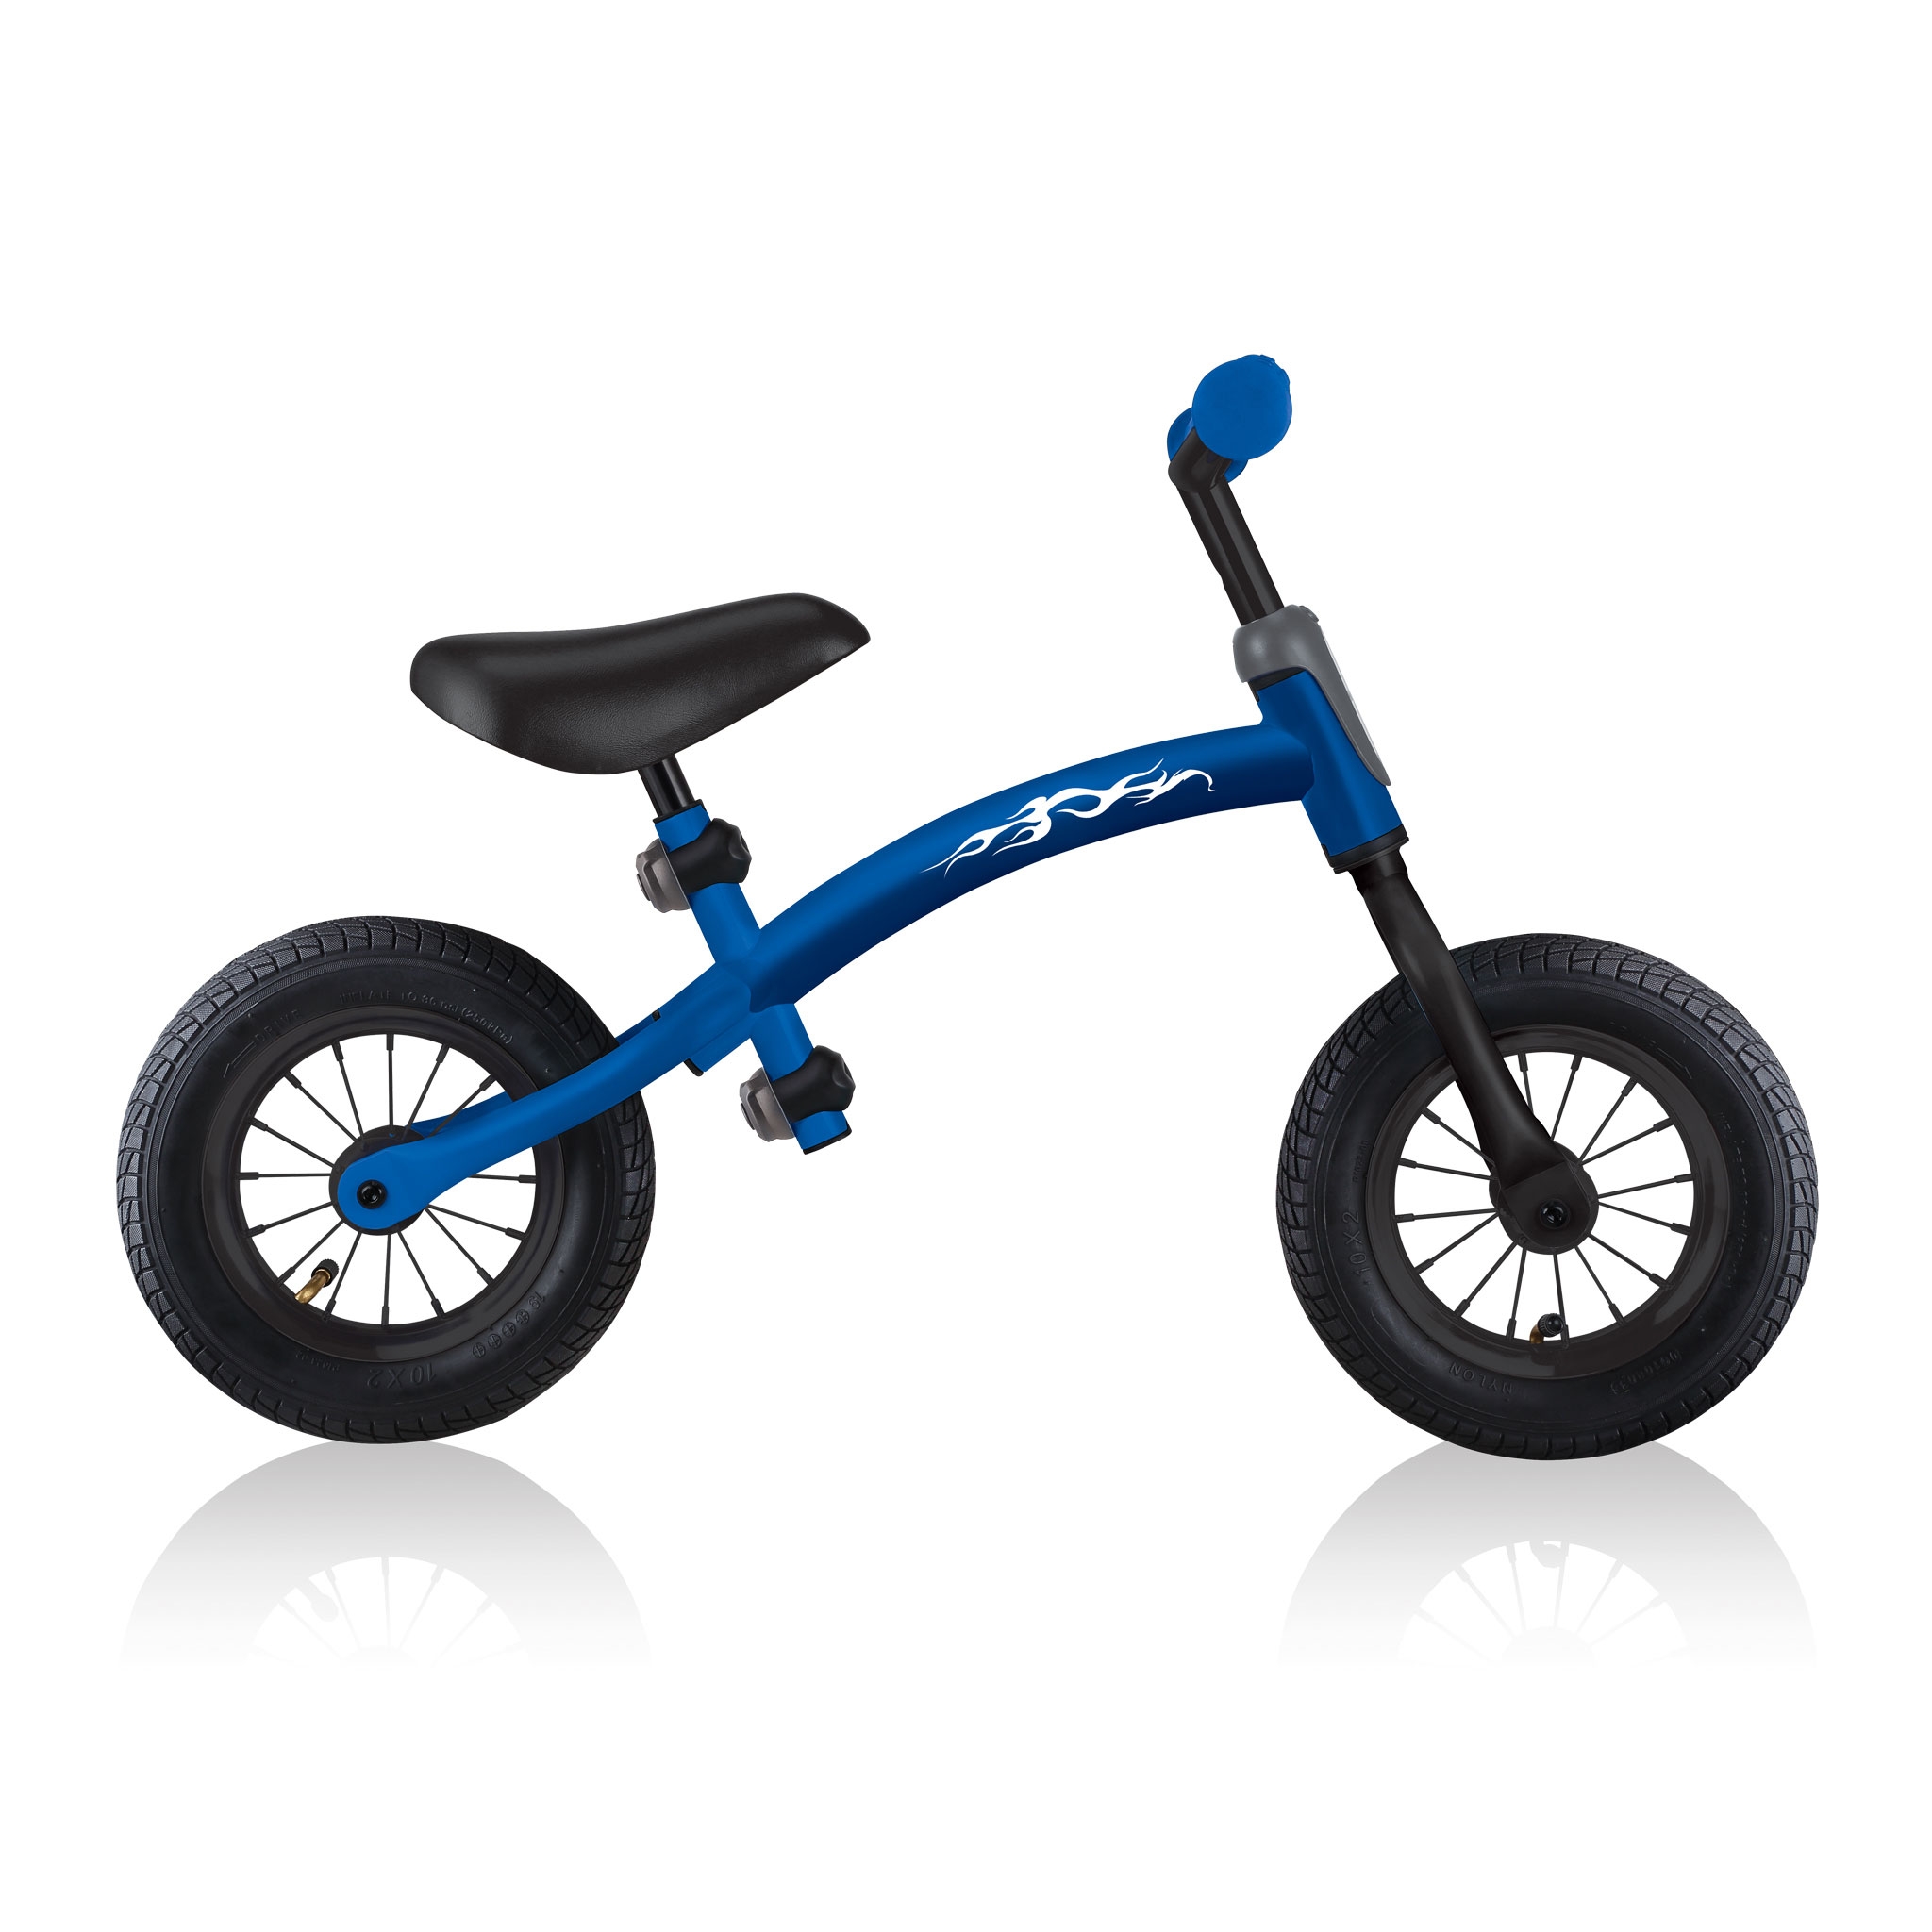 GO-BIKE-AIR-toddler-balance-bike-with-robust-steel-frame-and-shock-absorbing-rubber-tyres_navy-blue 5